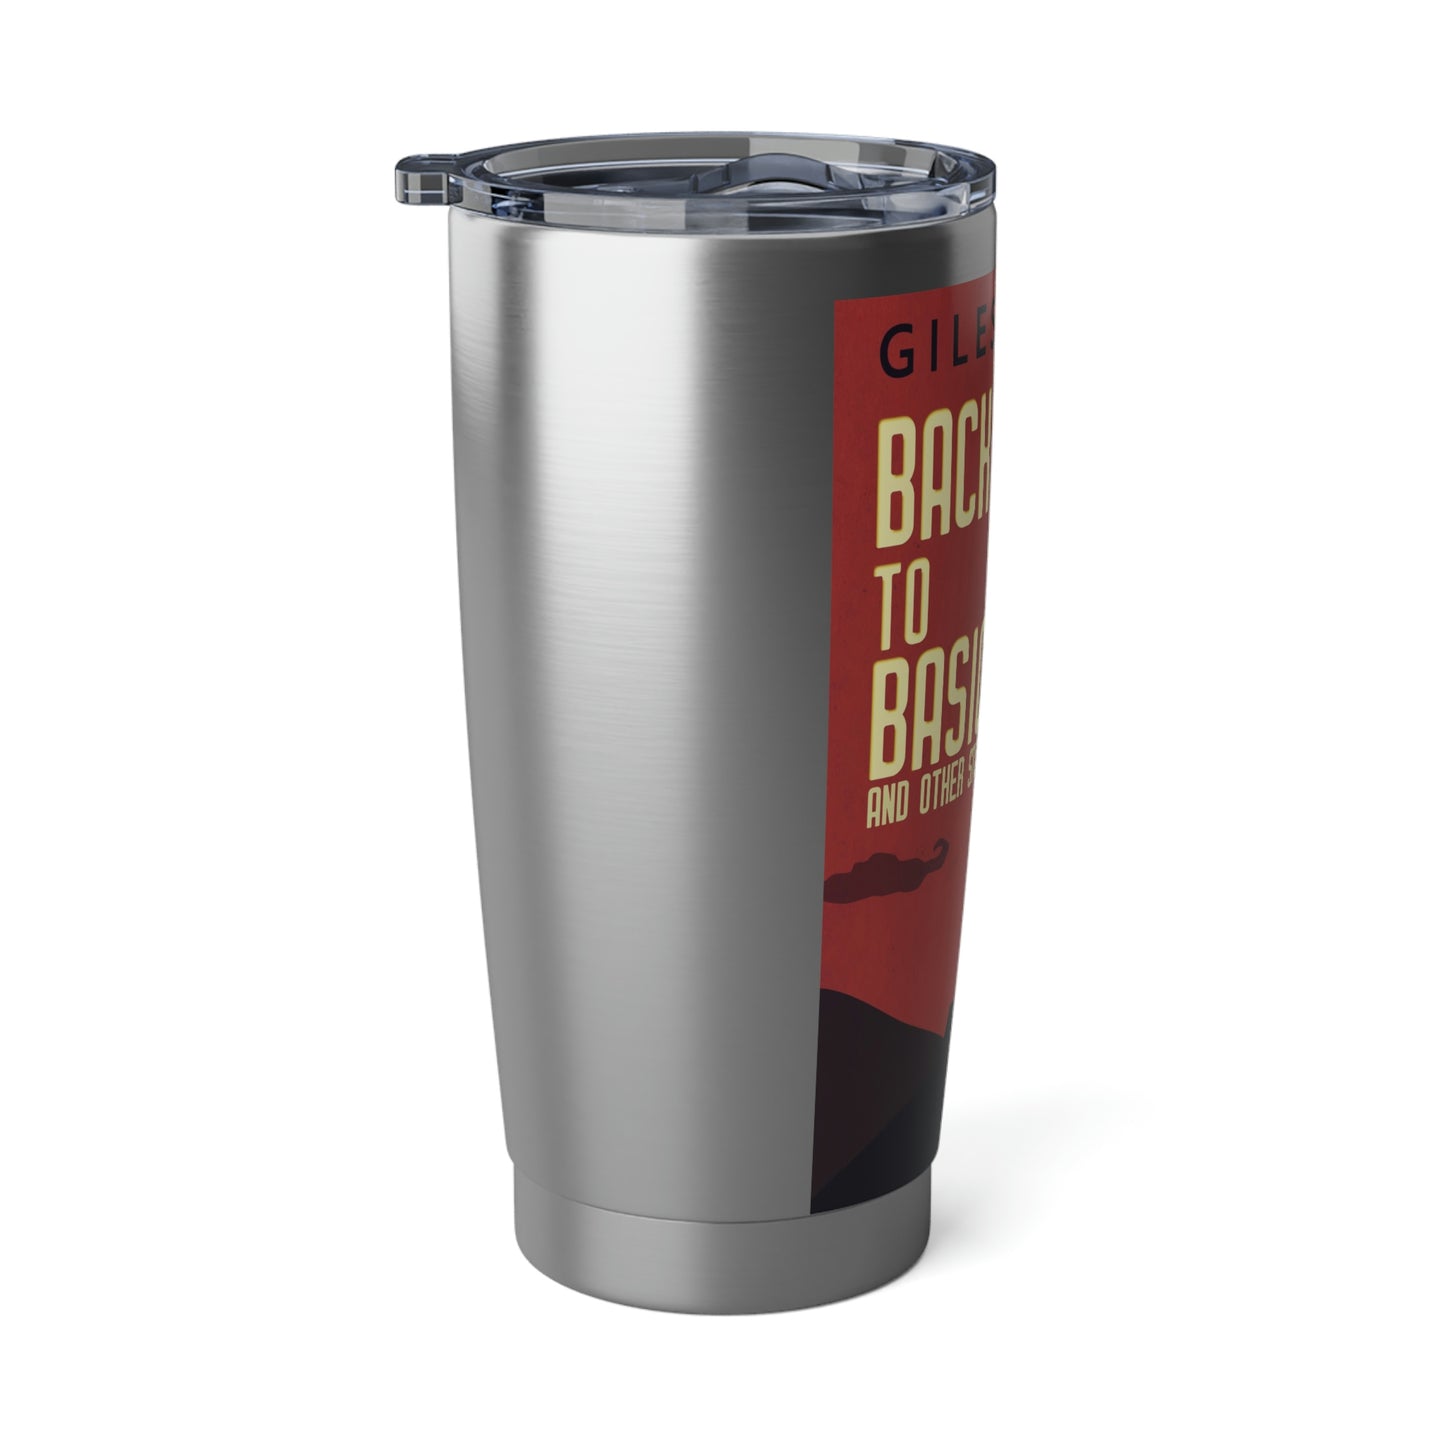 Back To Basics And Other Stories - 20 oz Tumbler